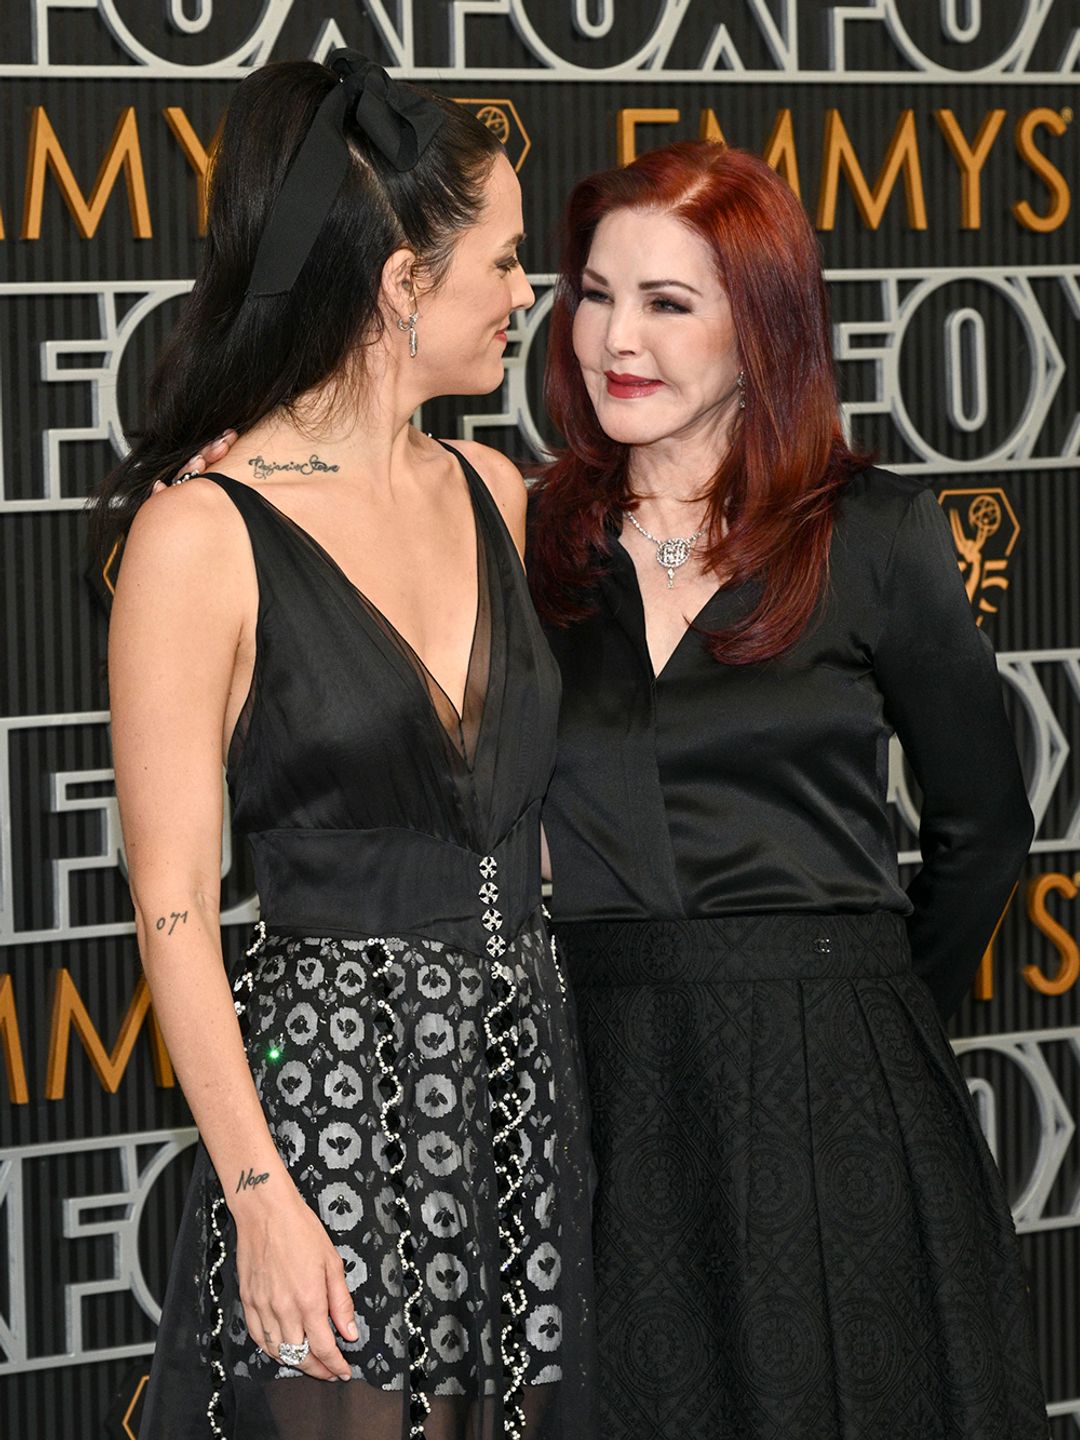 Riley Keough and Priscilla Presley at the Emmys